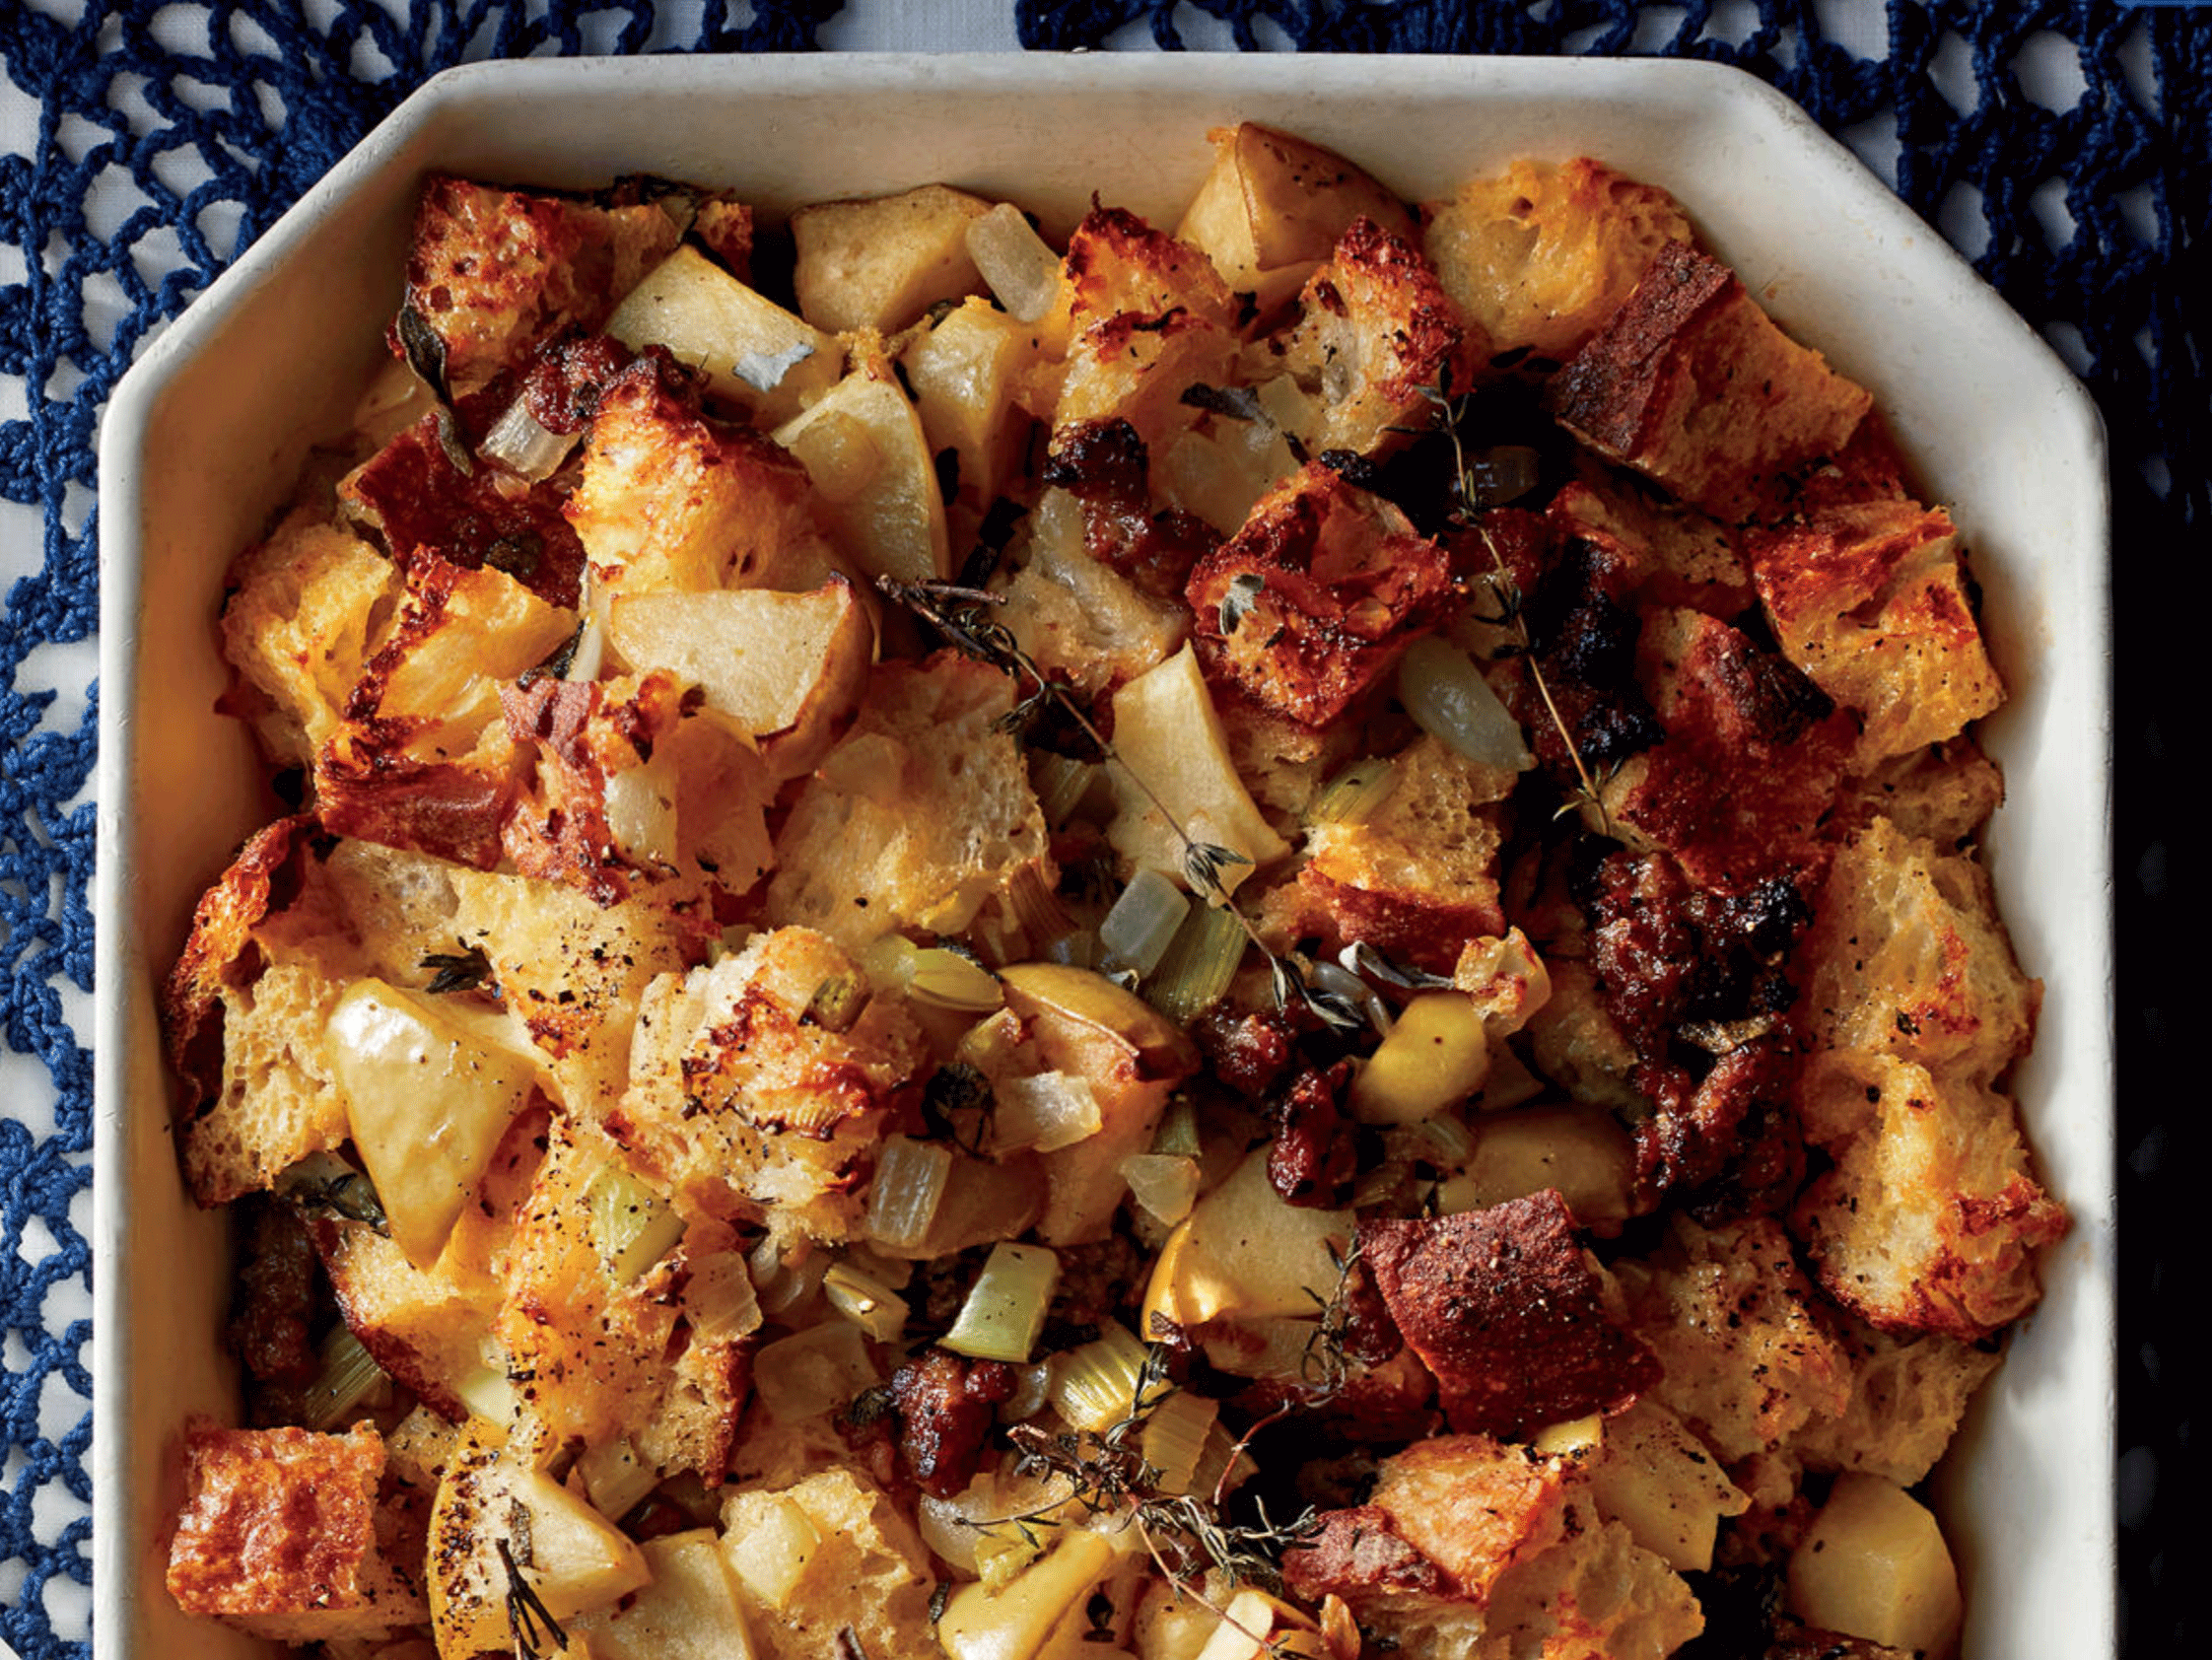 Spread the Holiday Cheer This Year With Judd’s Famous Sausage, Apple, and Herb Stuffing